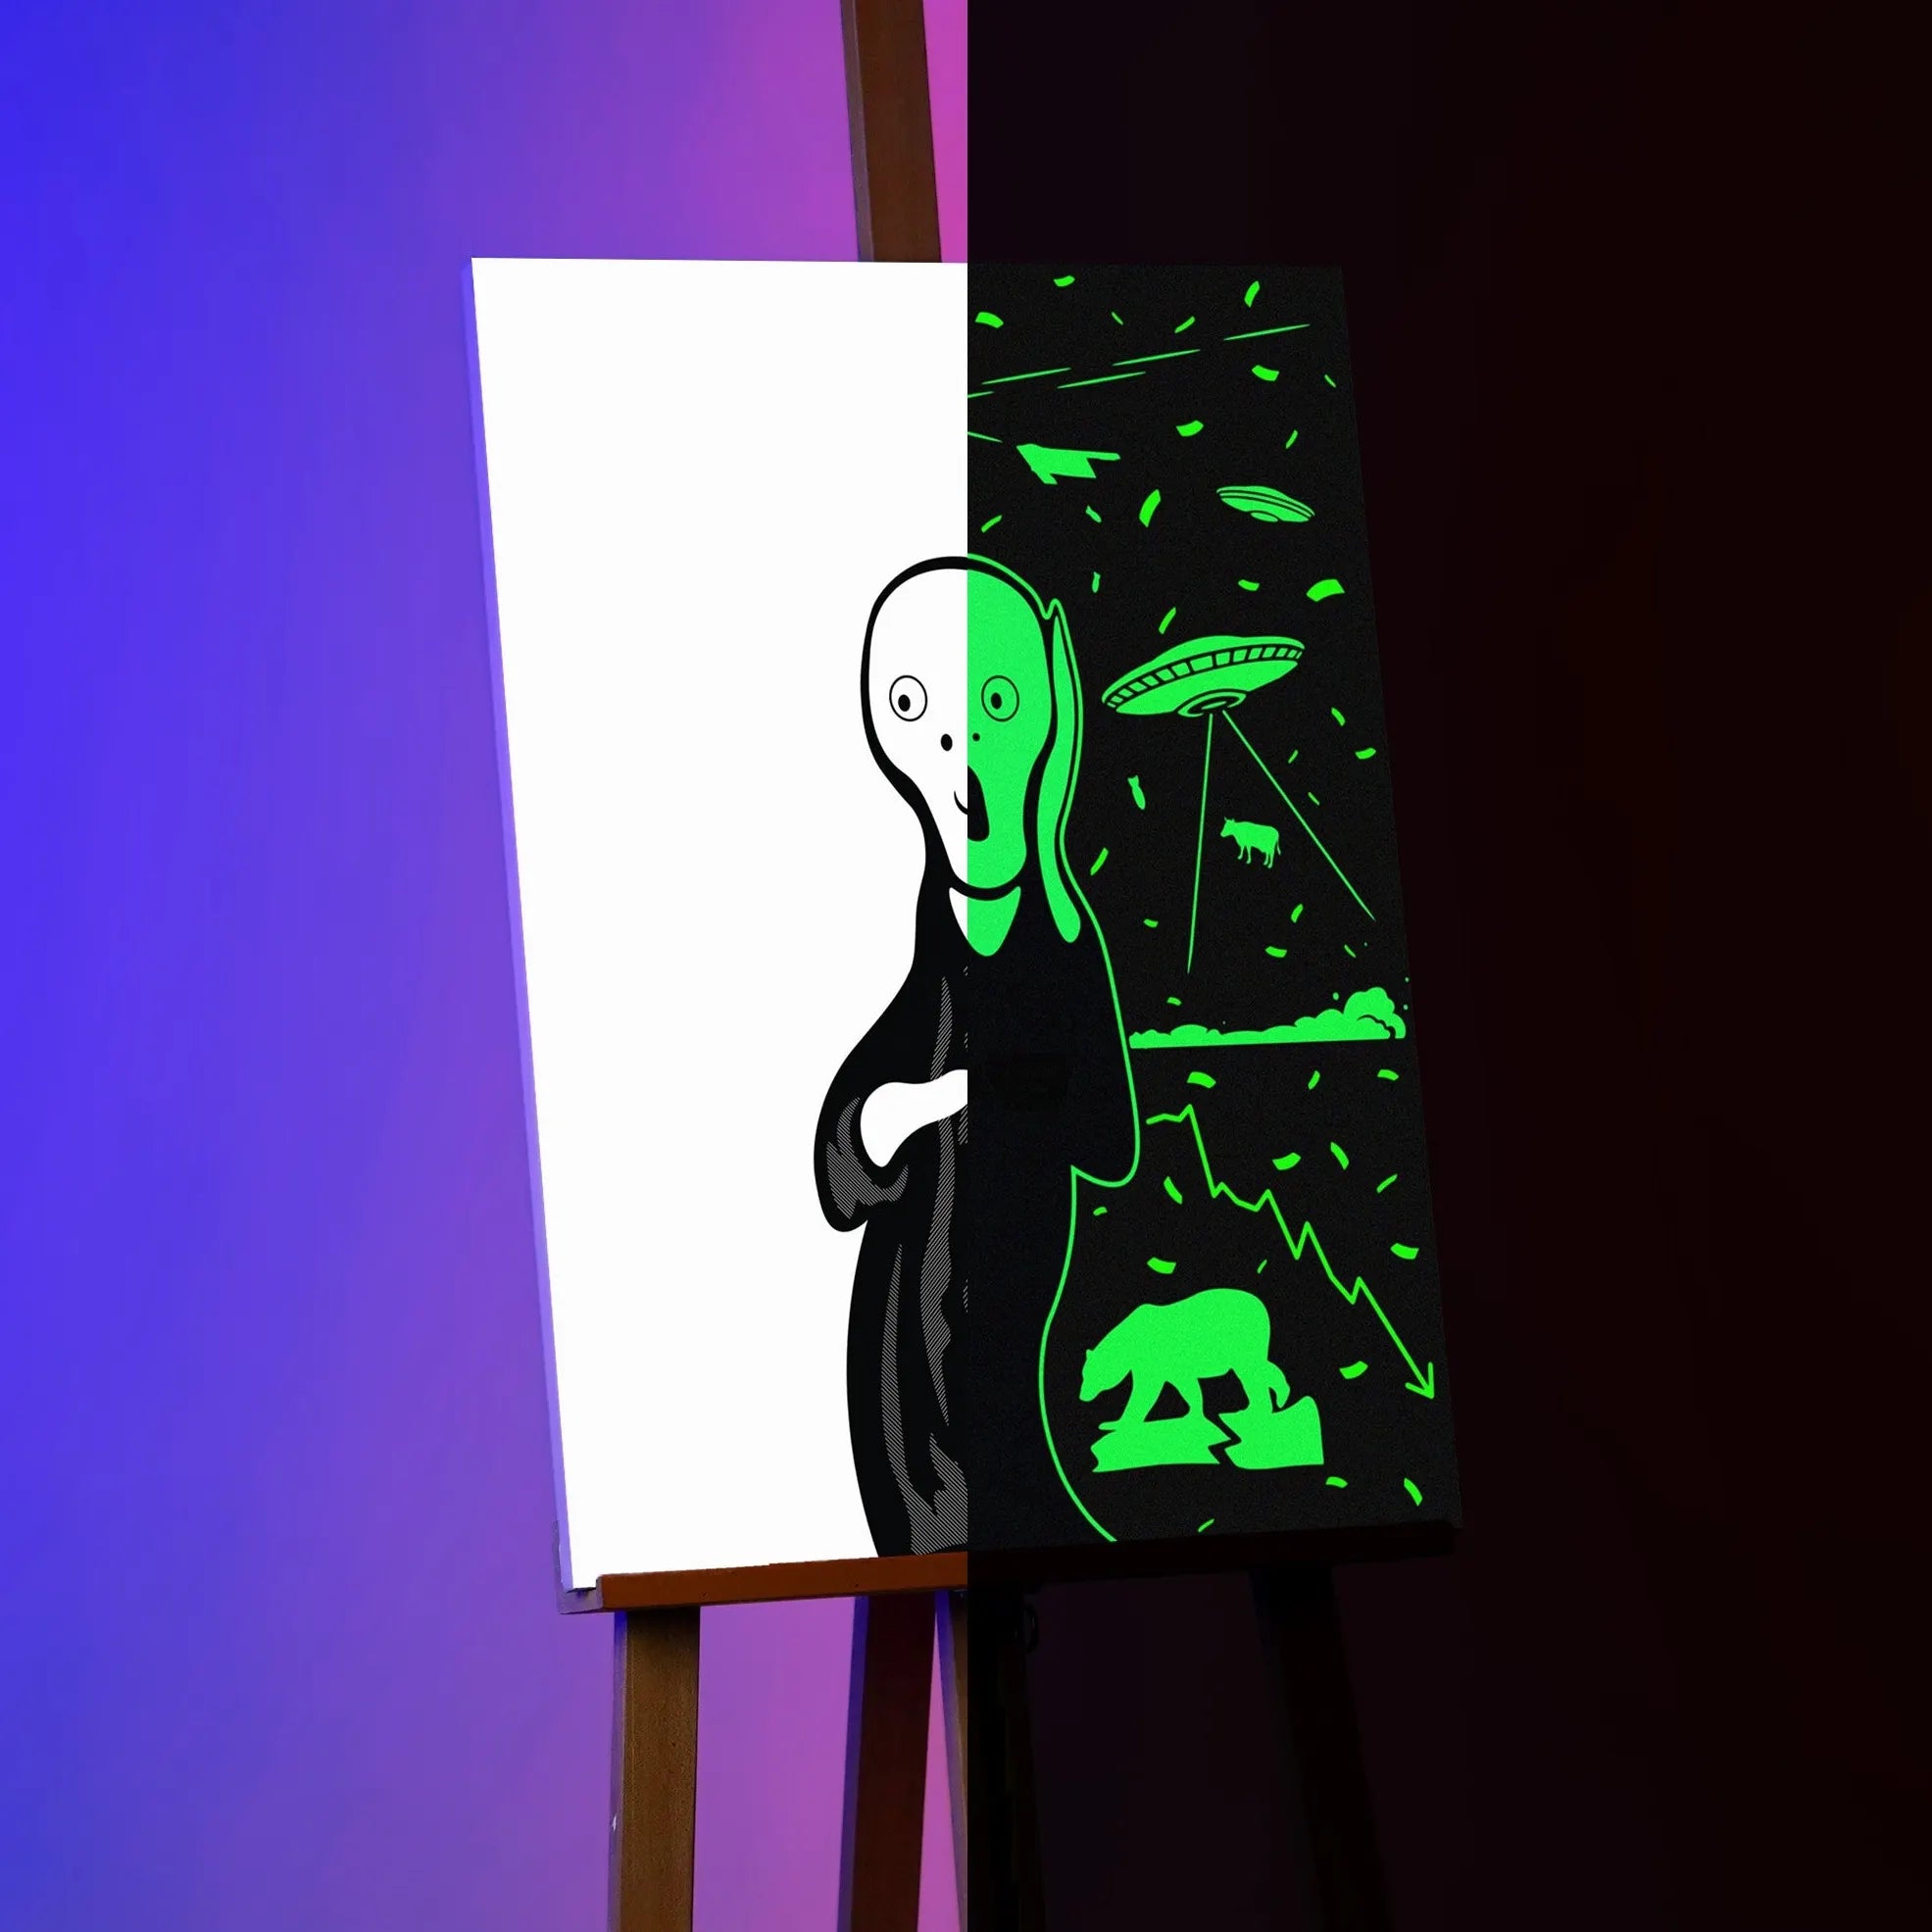 Glow in the dark The scream Painting on a stand showing day and night effects